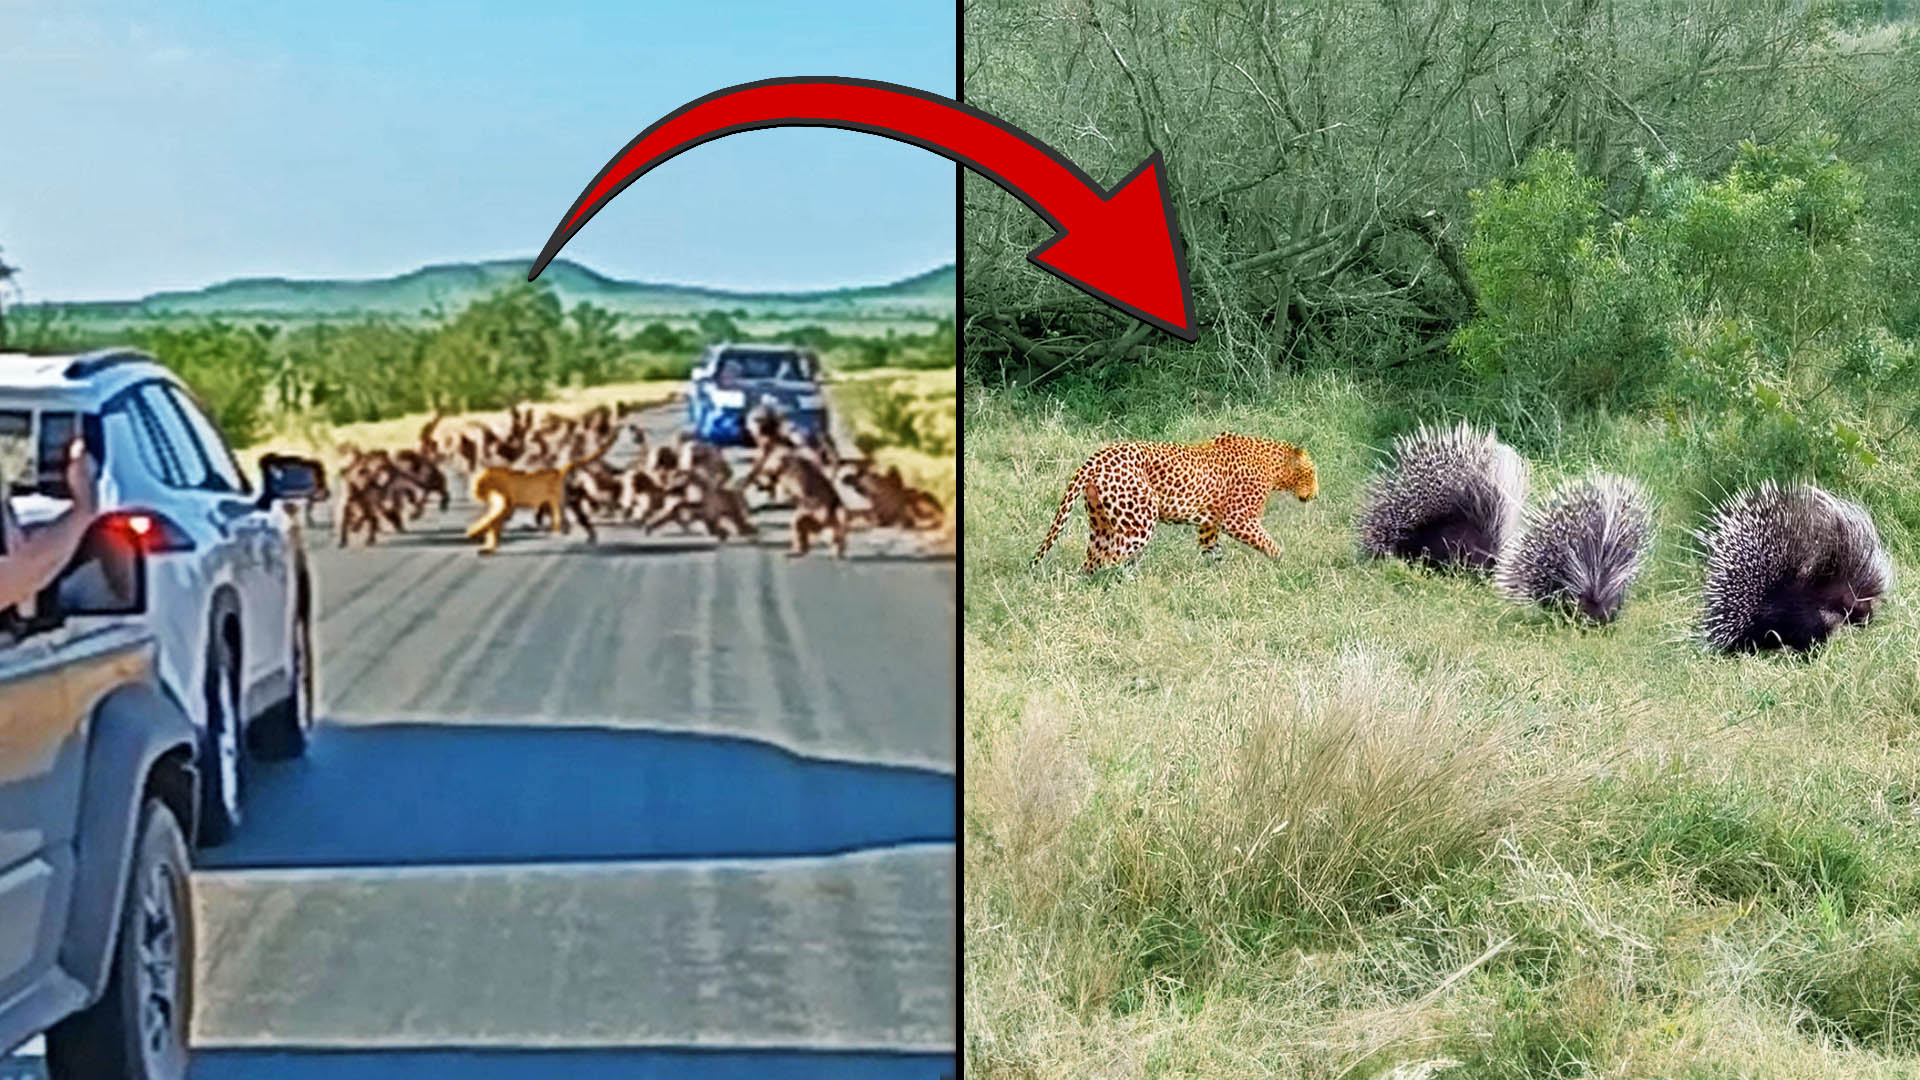 Third Angle of Famous Leopard-Baboon Brawl and Same Leopard Hunting Three Porcupines the Very Next Day